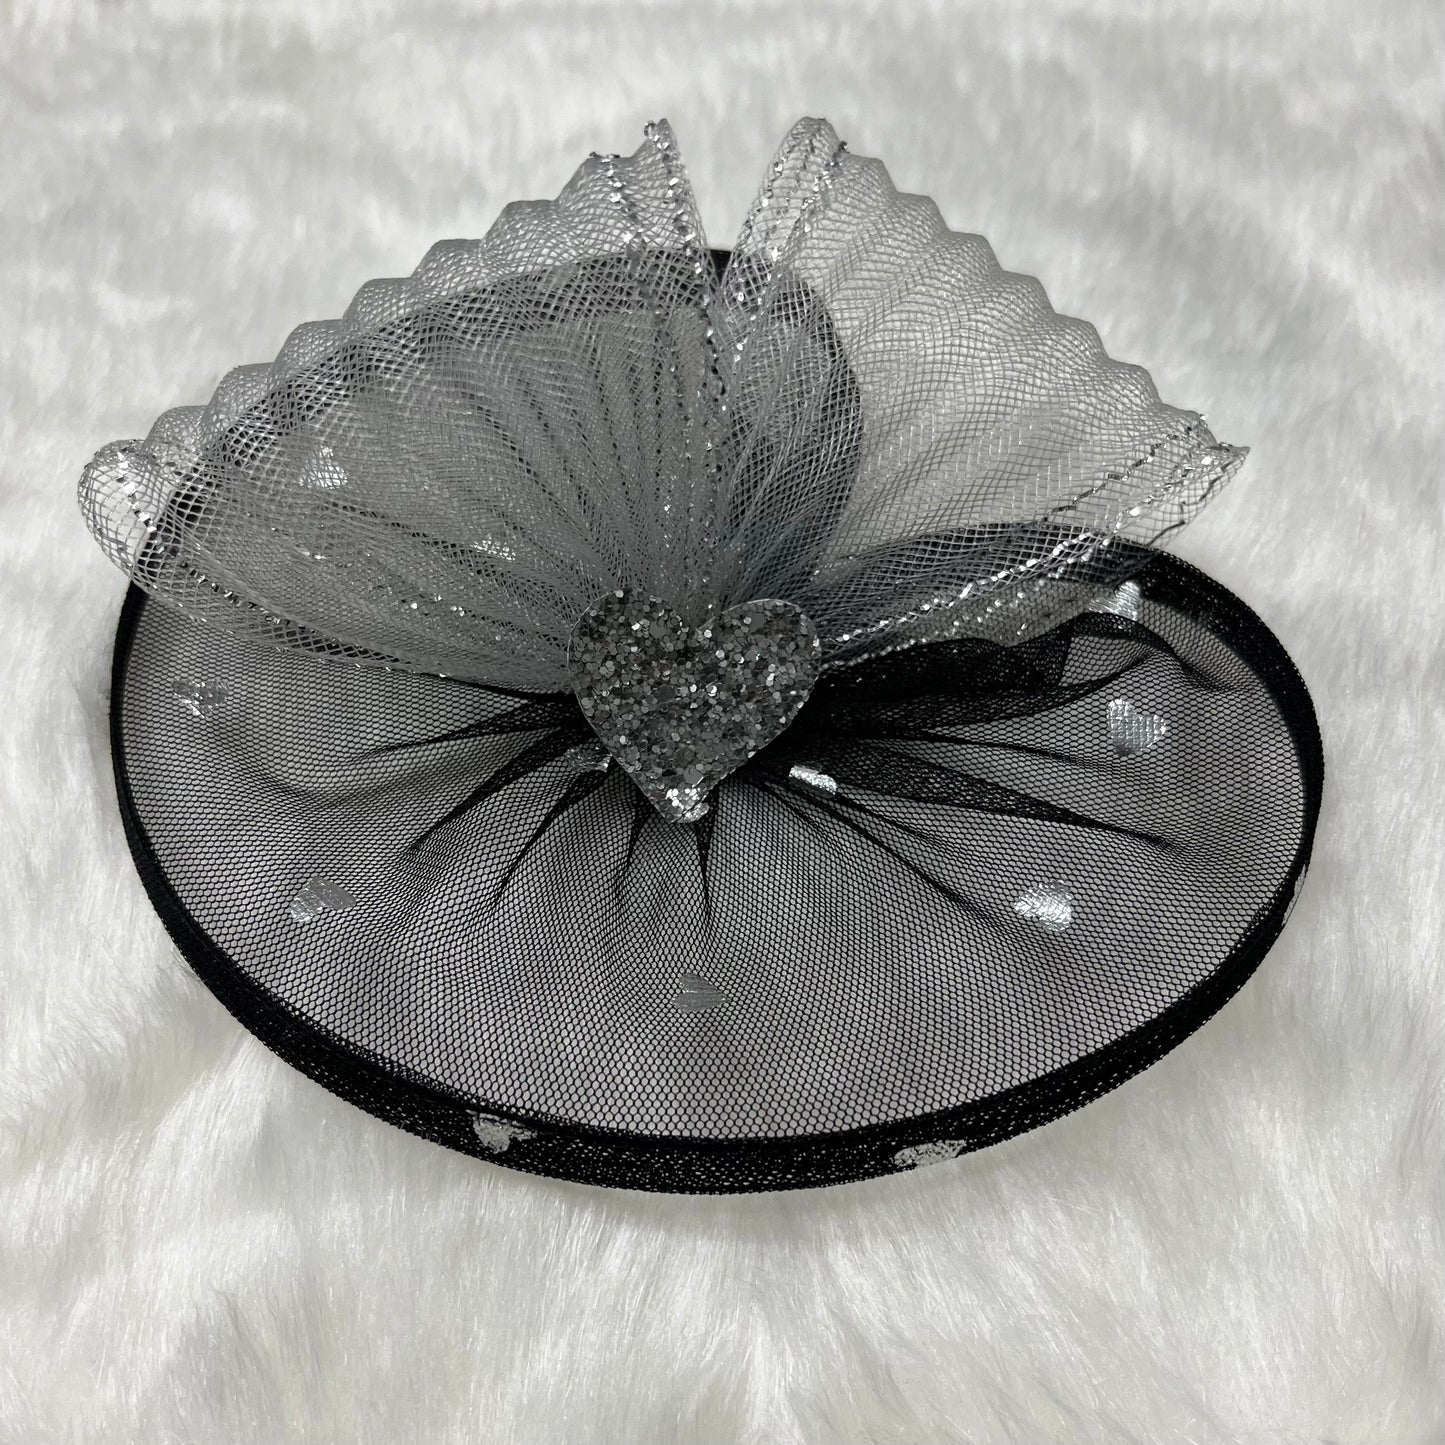 Hearts Alive Black Fascinator | Millinery Couture Headpiece